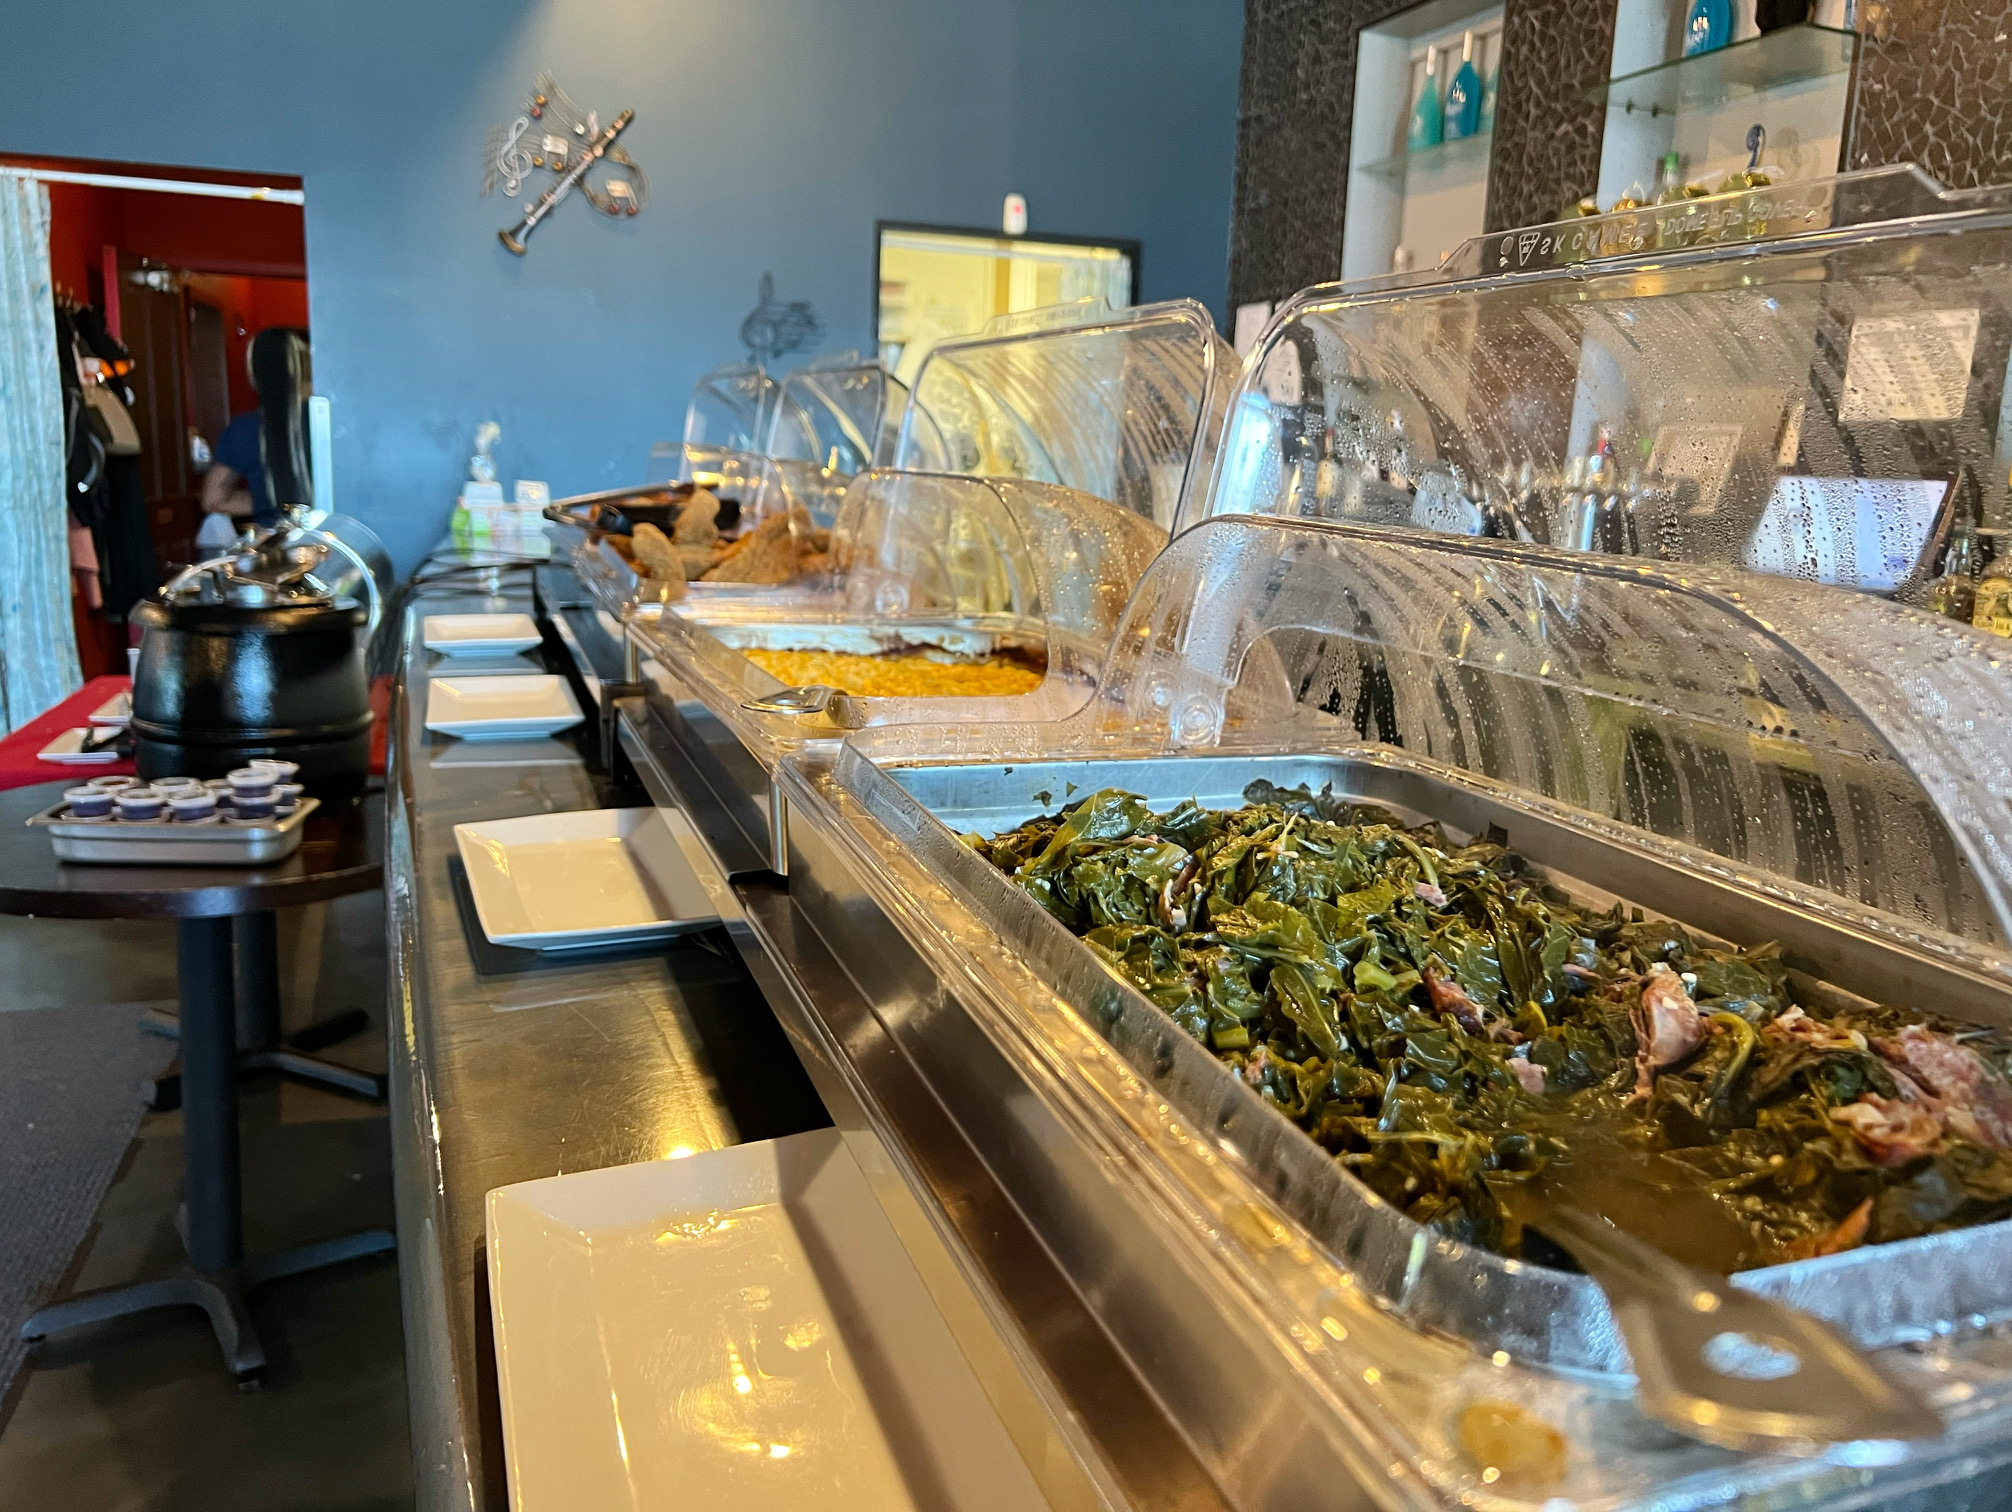 On the buffet line, there are lots of side dishes in hot silver pans with open plastic covers. Photo by Alyssa Buckley.